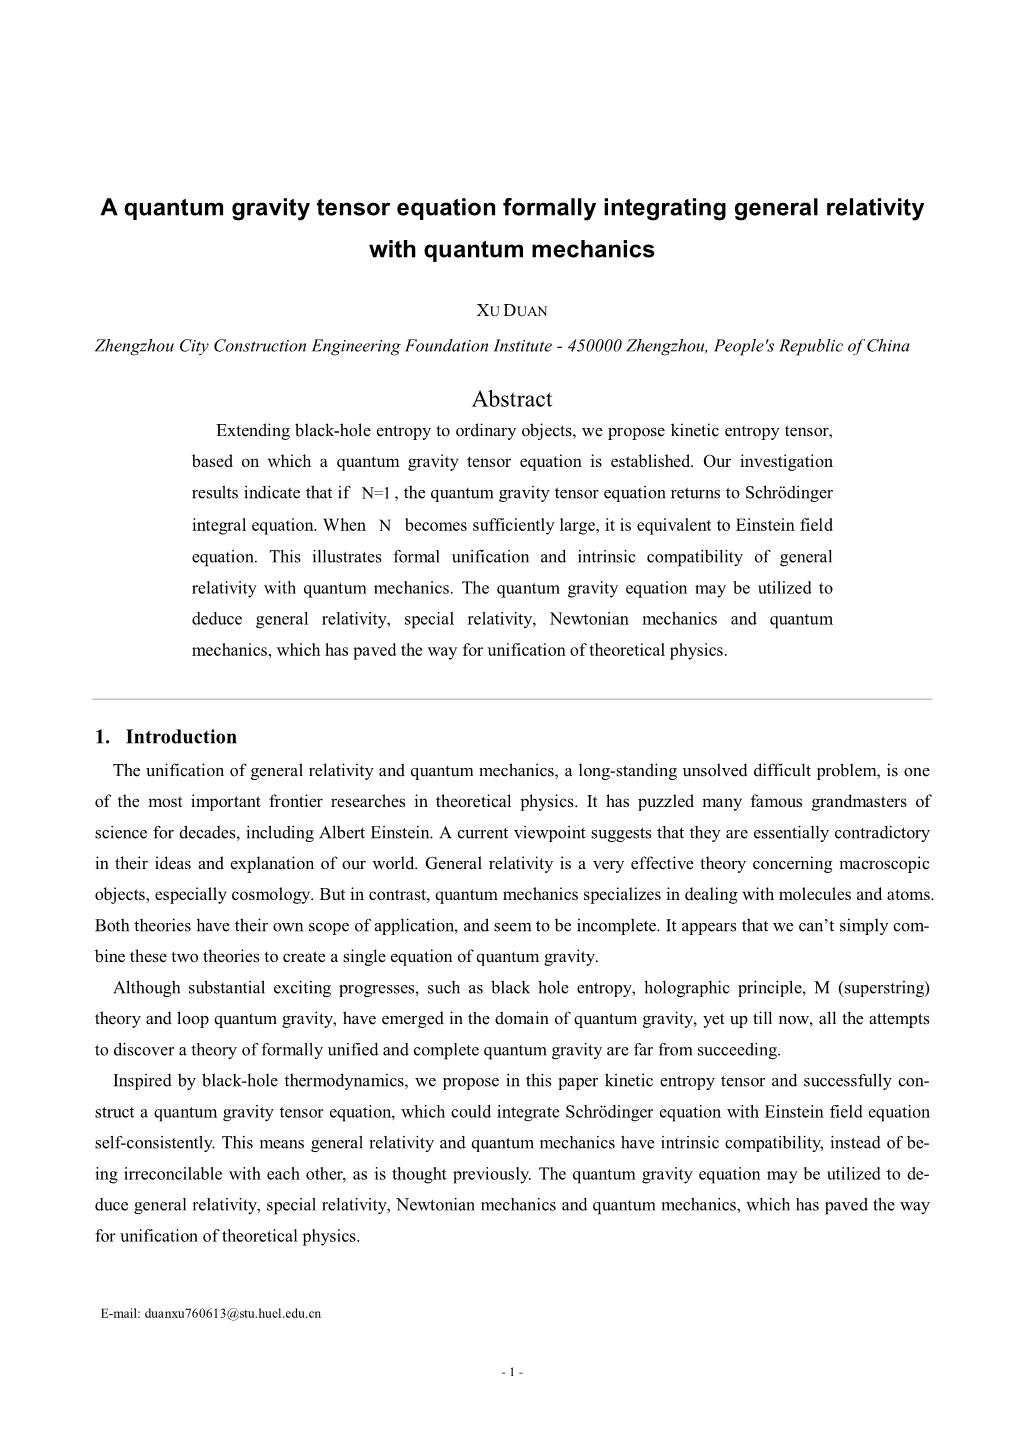 A Quantum Gravity Tensor Equation Formally Integrating General Relativity with Quantum Mechanics Abstract